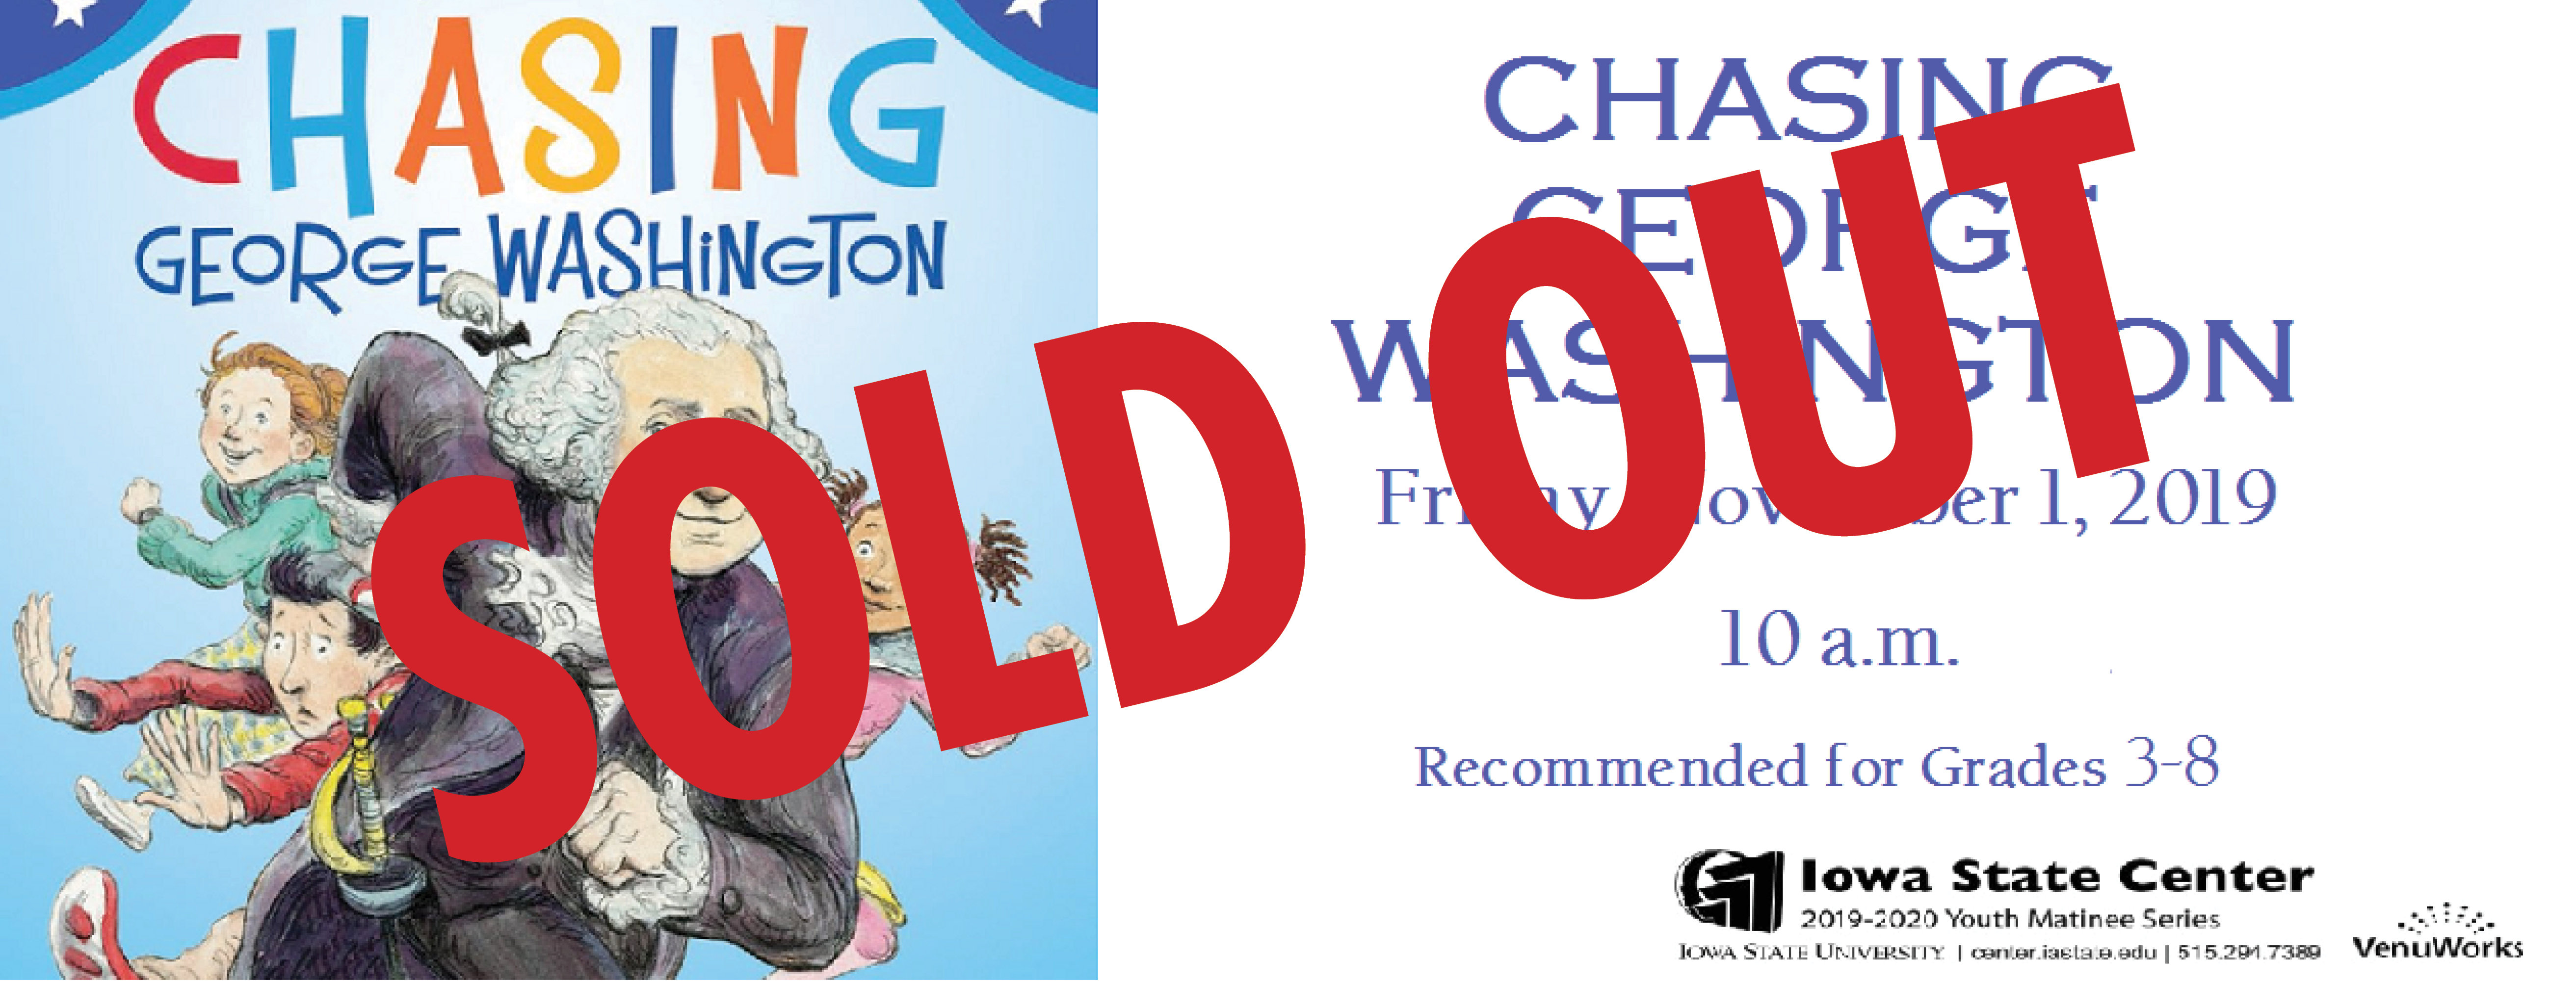 Chasing George Washington - SOLD OUT